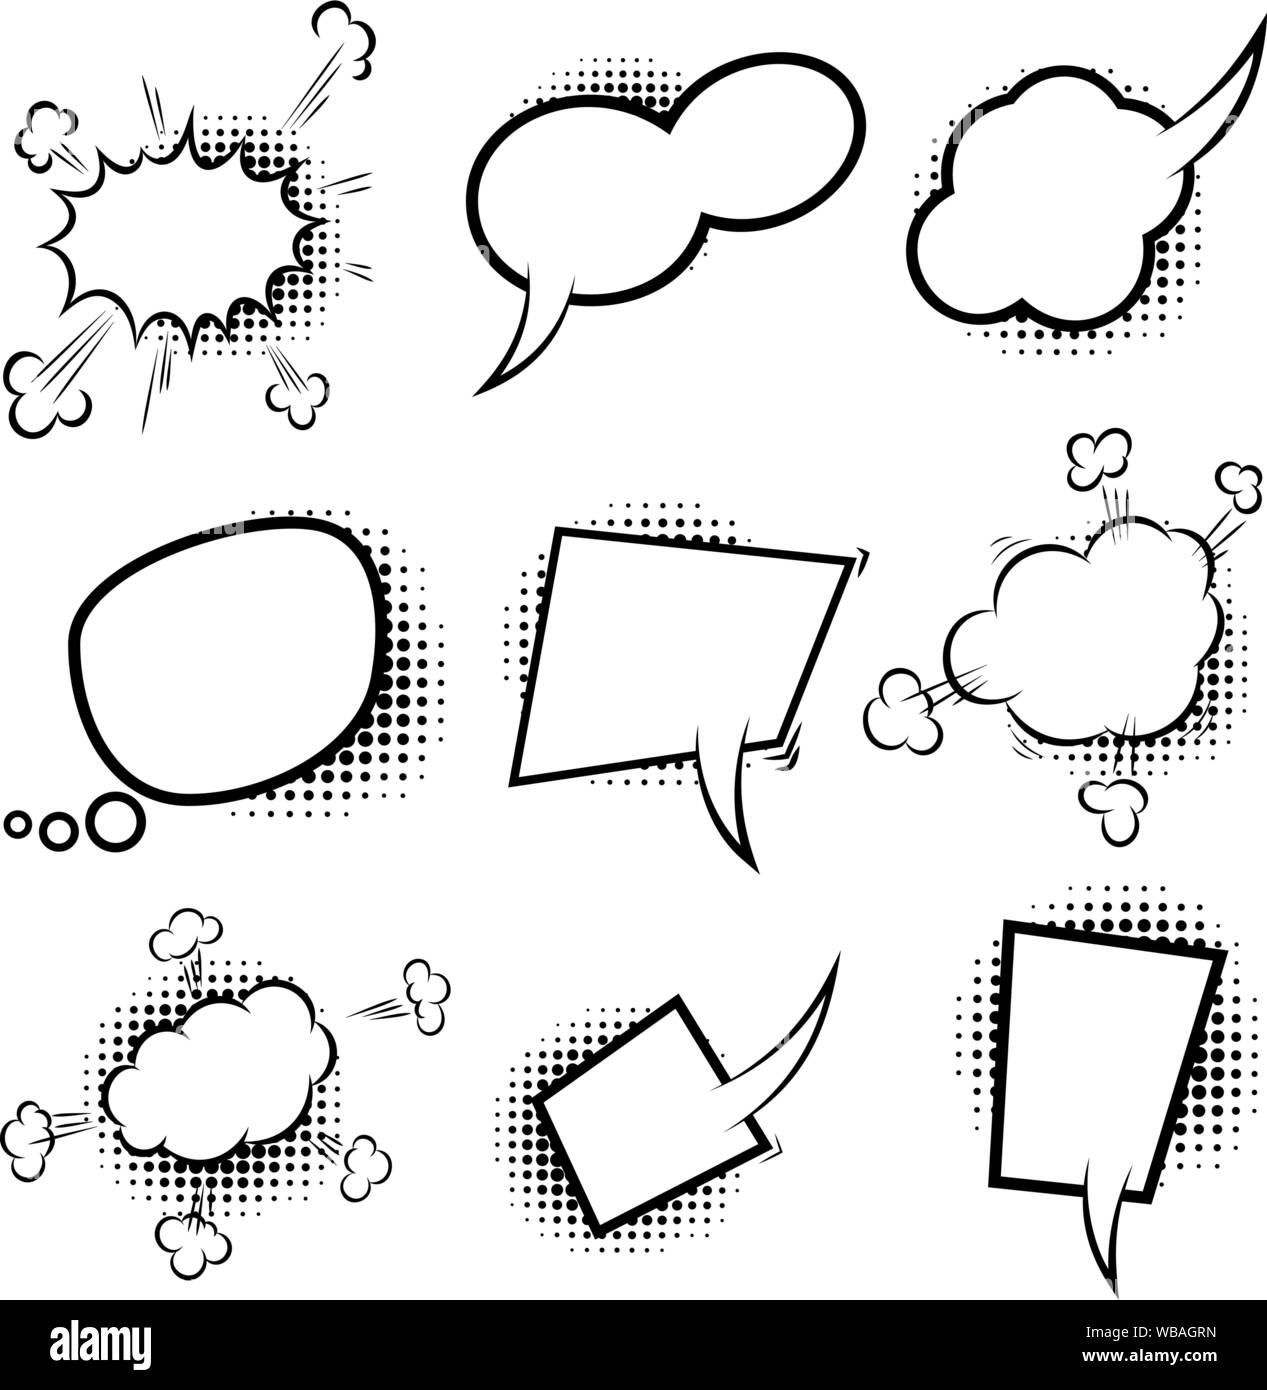 Set of empty comic style speech bubbles with halftone shadows. Design element for poster, emblem, sign, banner, flyer. Vector illustration Stock Vector